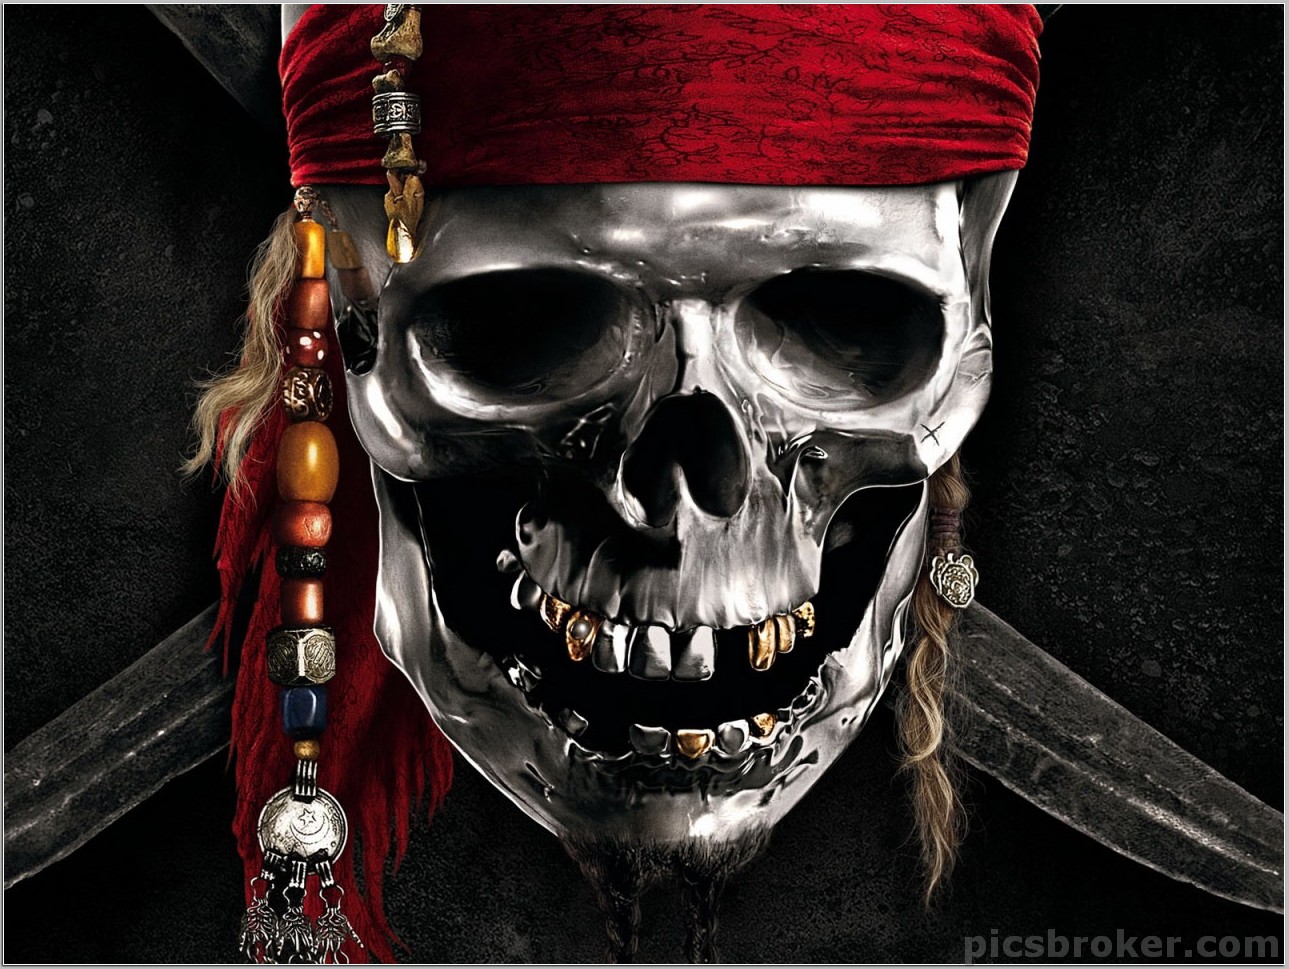 Wallpaper Danger Ghost 38 Pictures - Pirate Of Caribbean Flag , HD Wallpaper & Backgrounds